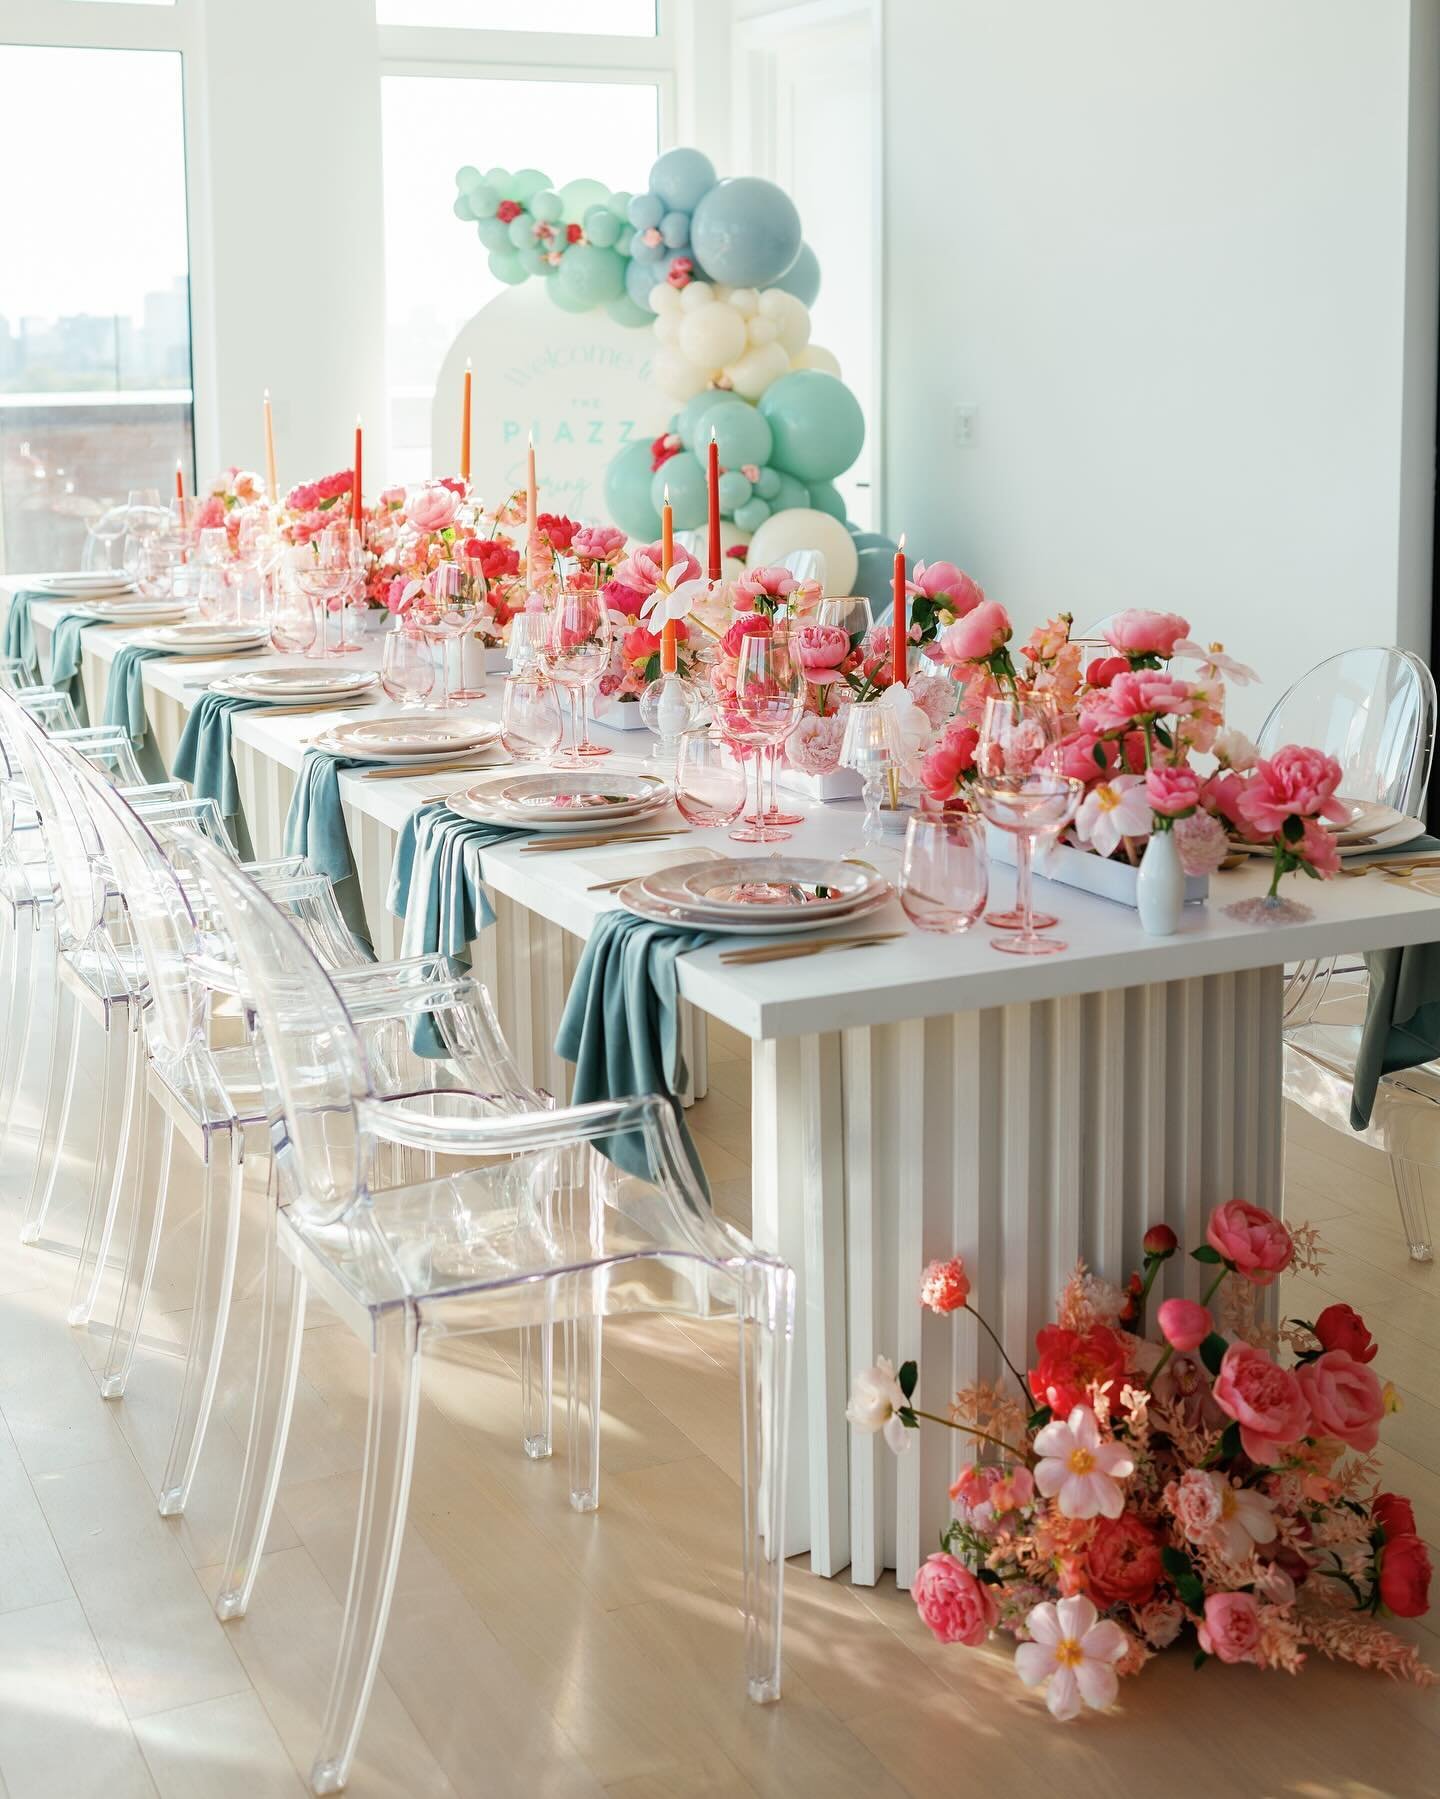 Private Penthouse Party at @livepiazza. Such a dream of a day.

Event Planner: @ivorycollectiveevents
Florists: @ramfloral 
Tablescape: @citrine.phl 
Photography: @Rachelrosensteinphoto 
Venue: @Livepiazza
Catering: @posthastephilly
Furniture Rentals